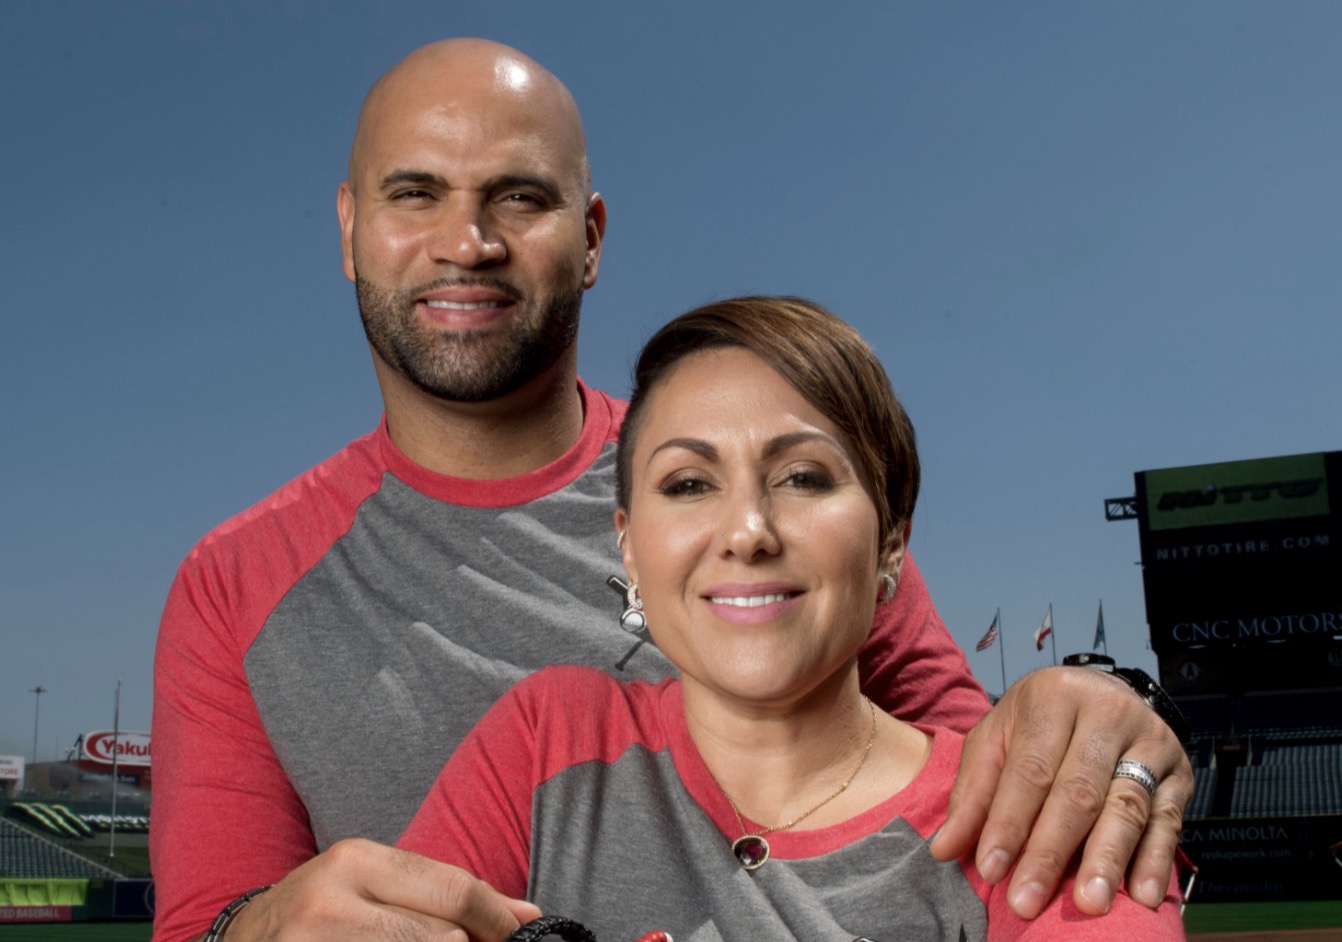 Albert Pujols Announces Divorce from Wife of 22 Years Days After She Underwent Surgery to Remove Brain Tumor